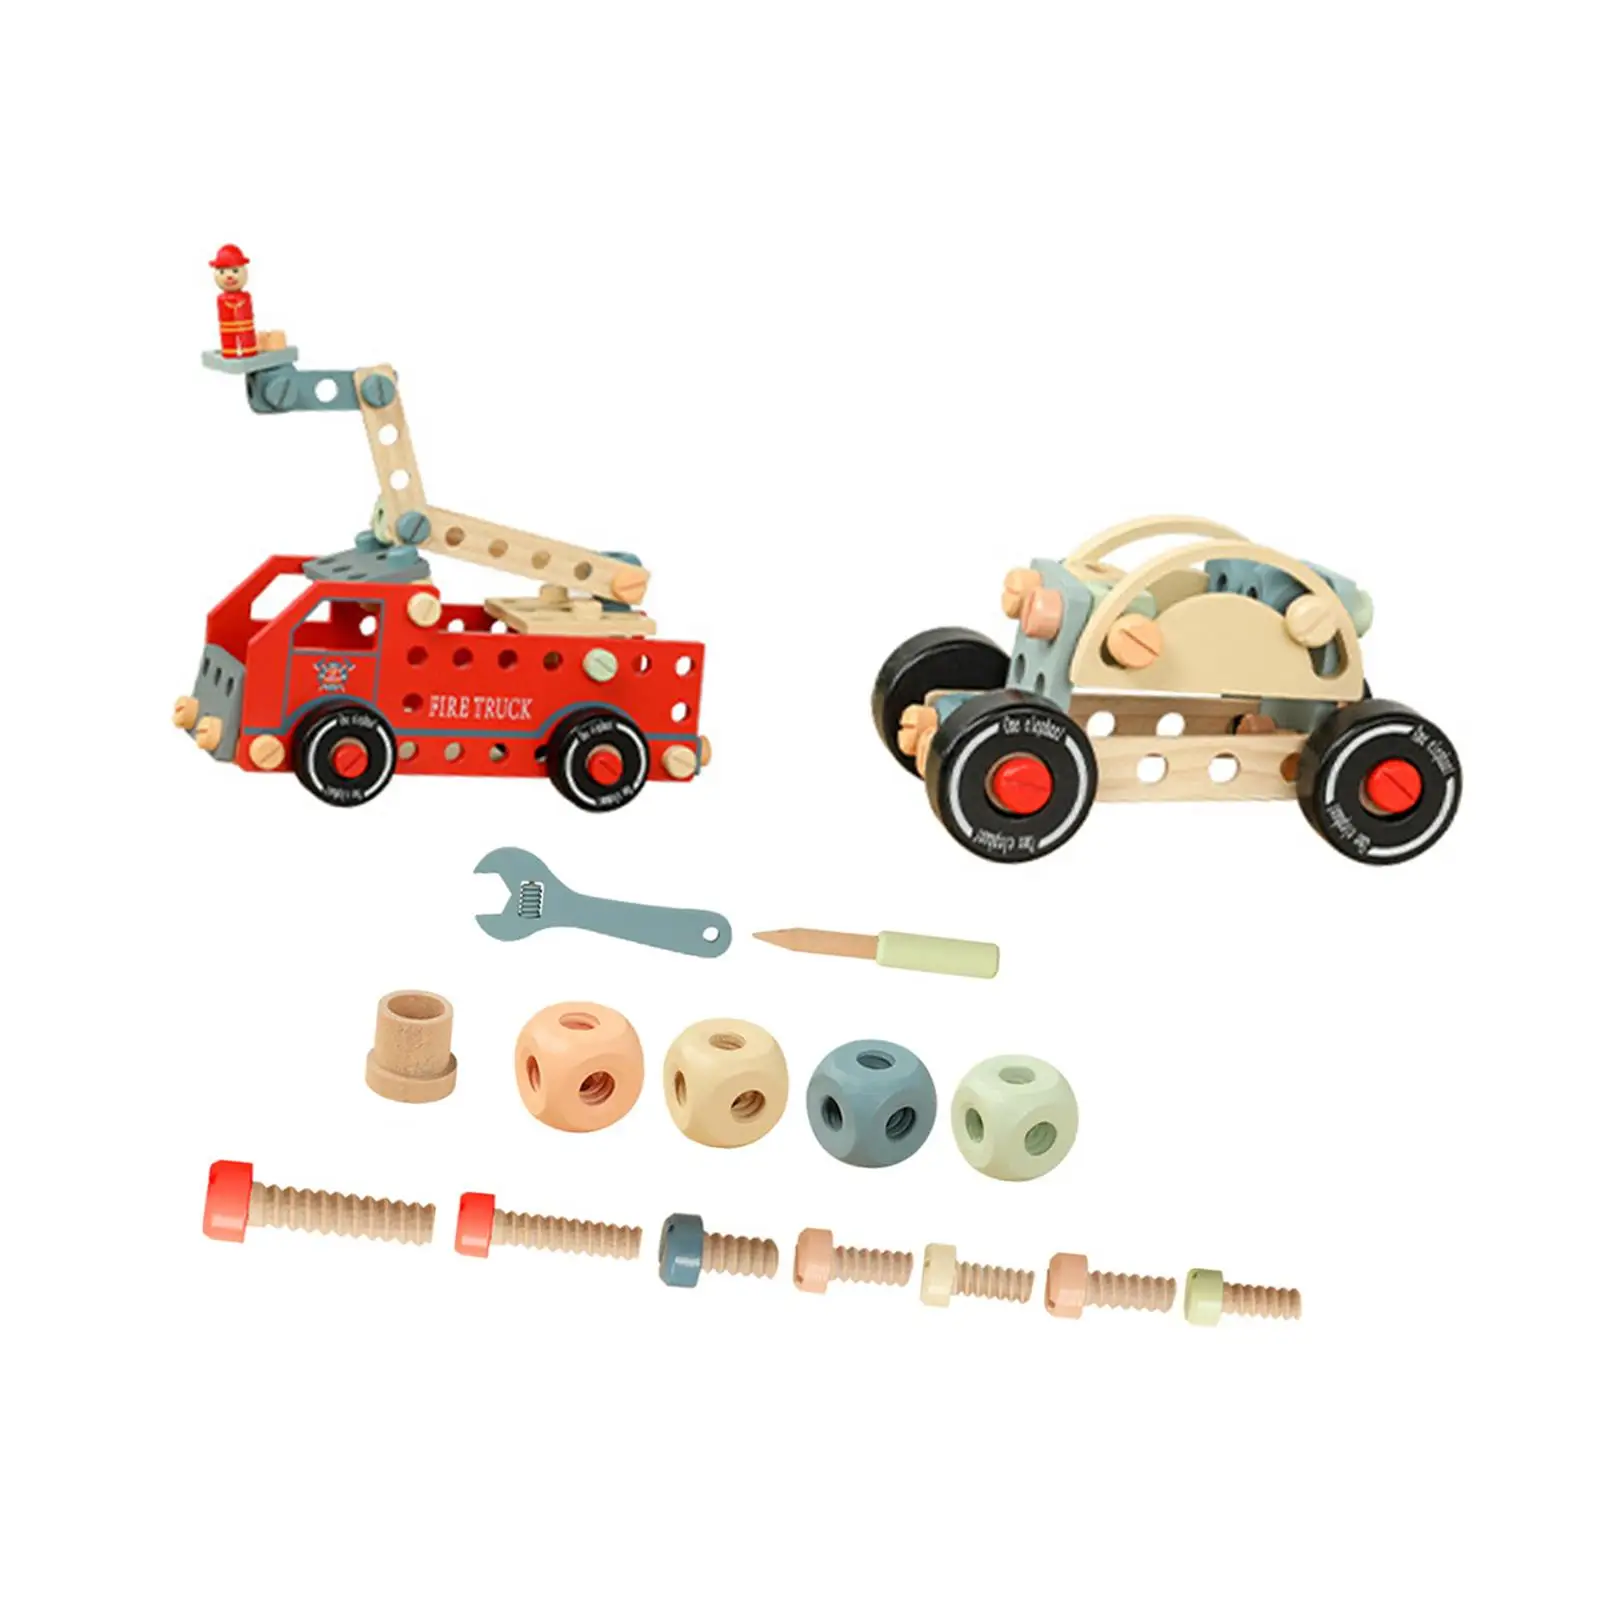 Nut Disassembly Toy Educational Creative Construction Building Toy Pretend Game Toolbox for Activities Role Play Preschool